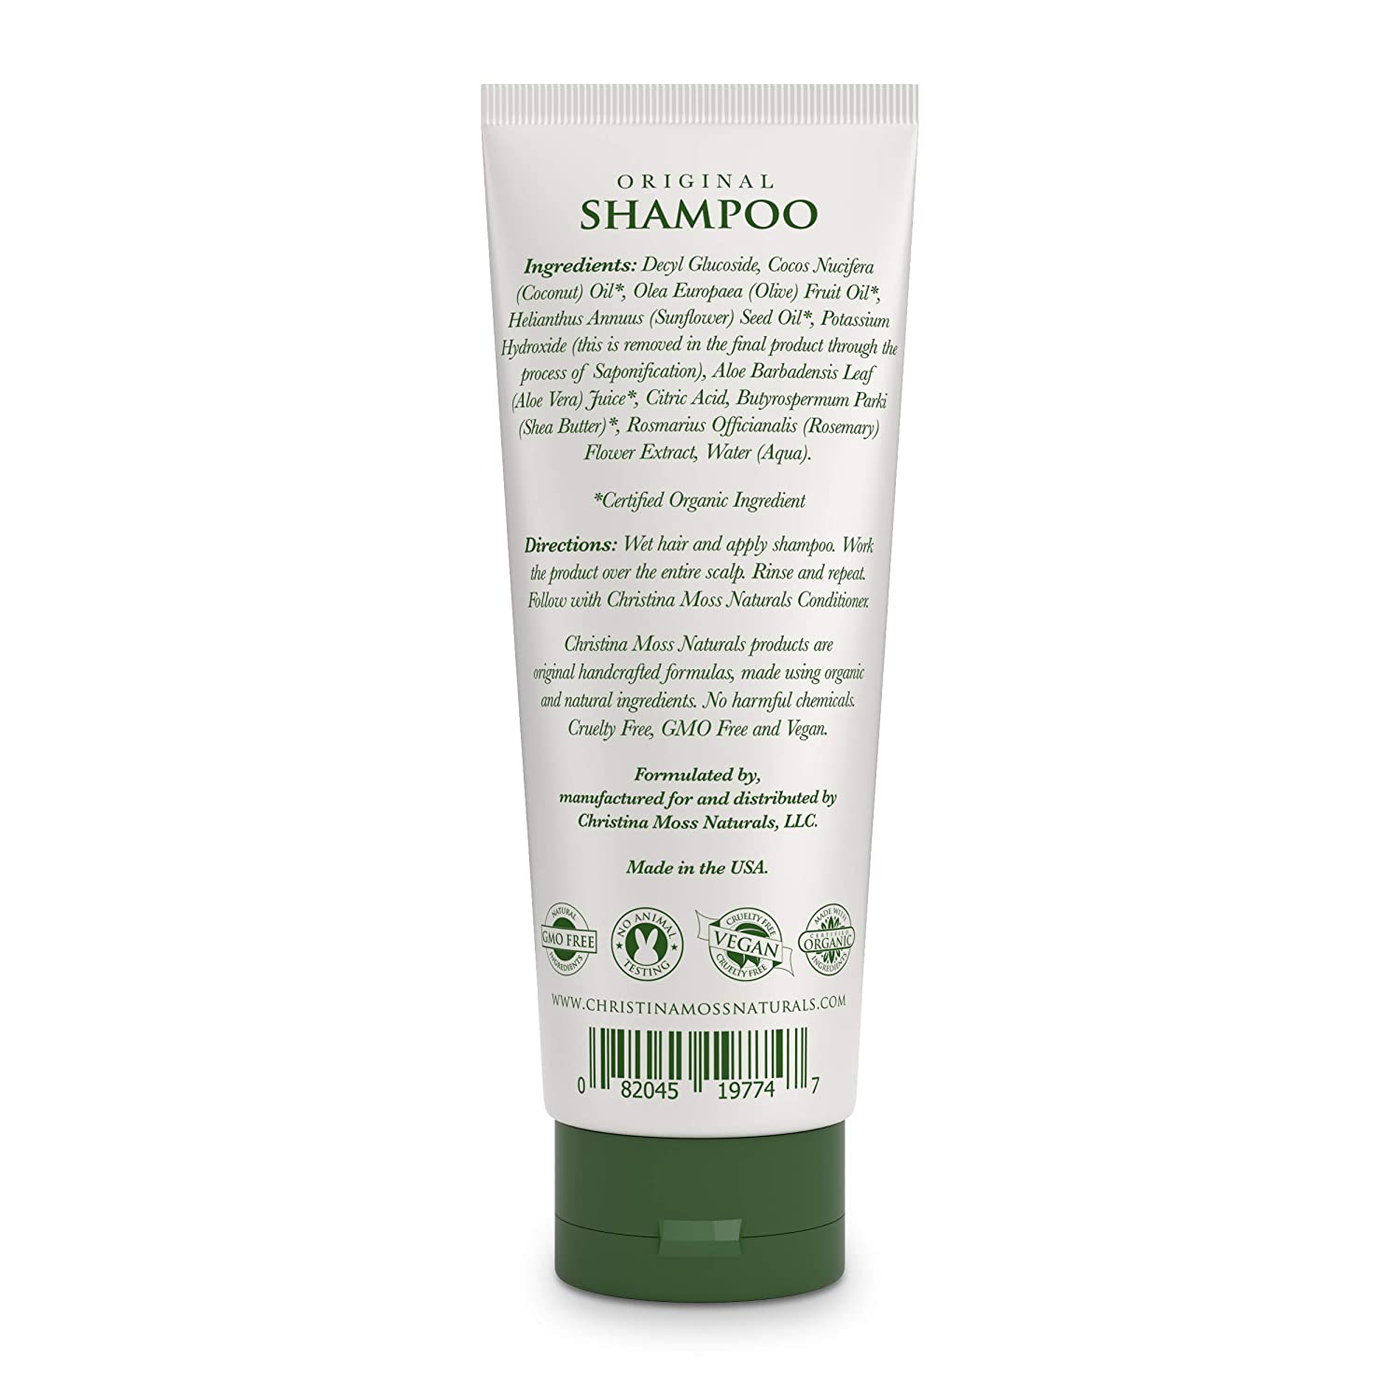 Hair Shampoo - With Organic Aloe & Essential Oils – Rich & Nourishing Ingredients for Moisturizing, Clarifying and Hydrating - Sulfate Free - Vegan – Good For Dry Hair - Dry Scalp - Oily, Curly Or Fine Hair - For Women & Men - Christina Moss Naturals